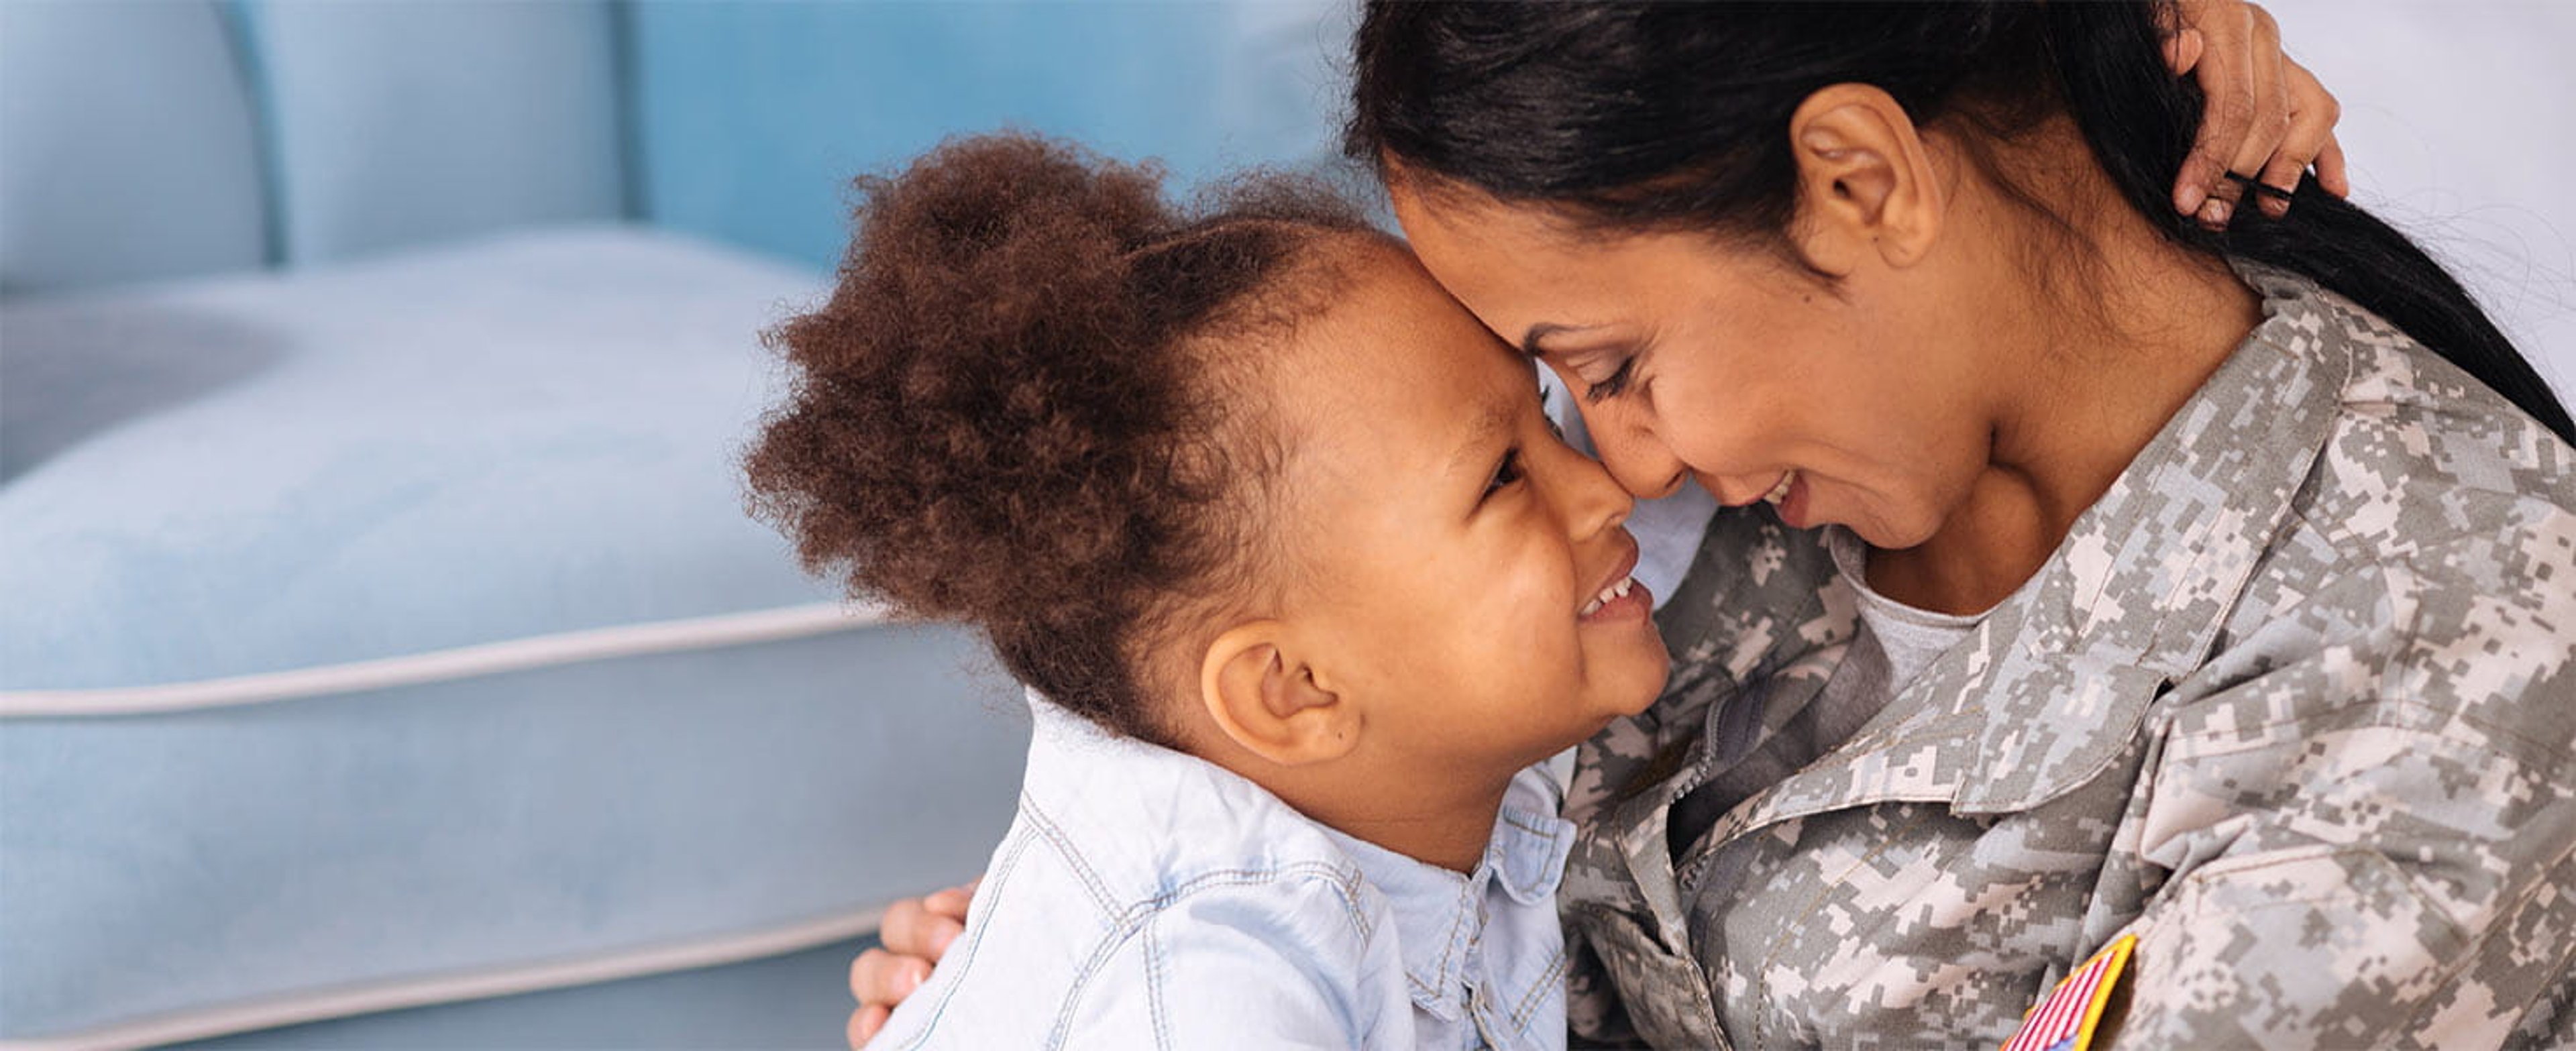 A military mom in uniform lovingly embraces her young daughter, their heads touching eye to eye conveying deep emotion and connection.